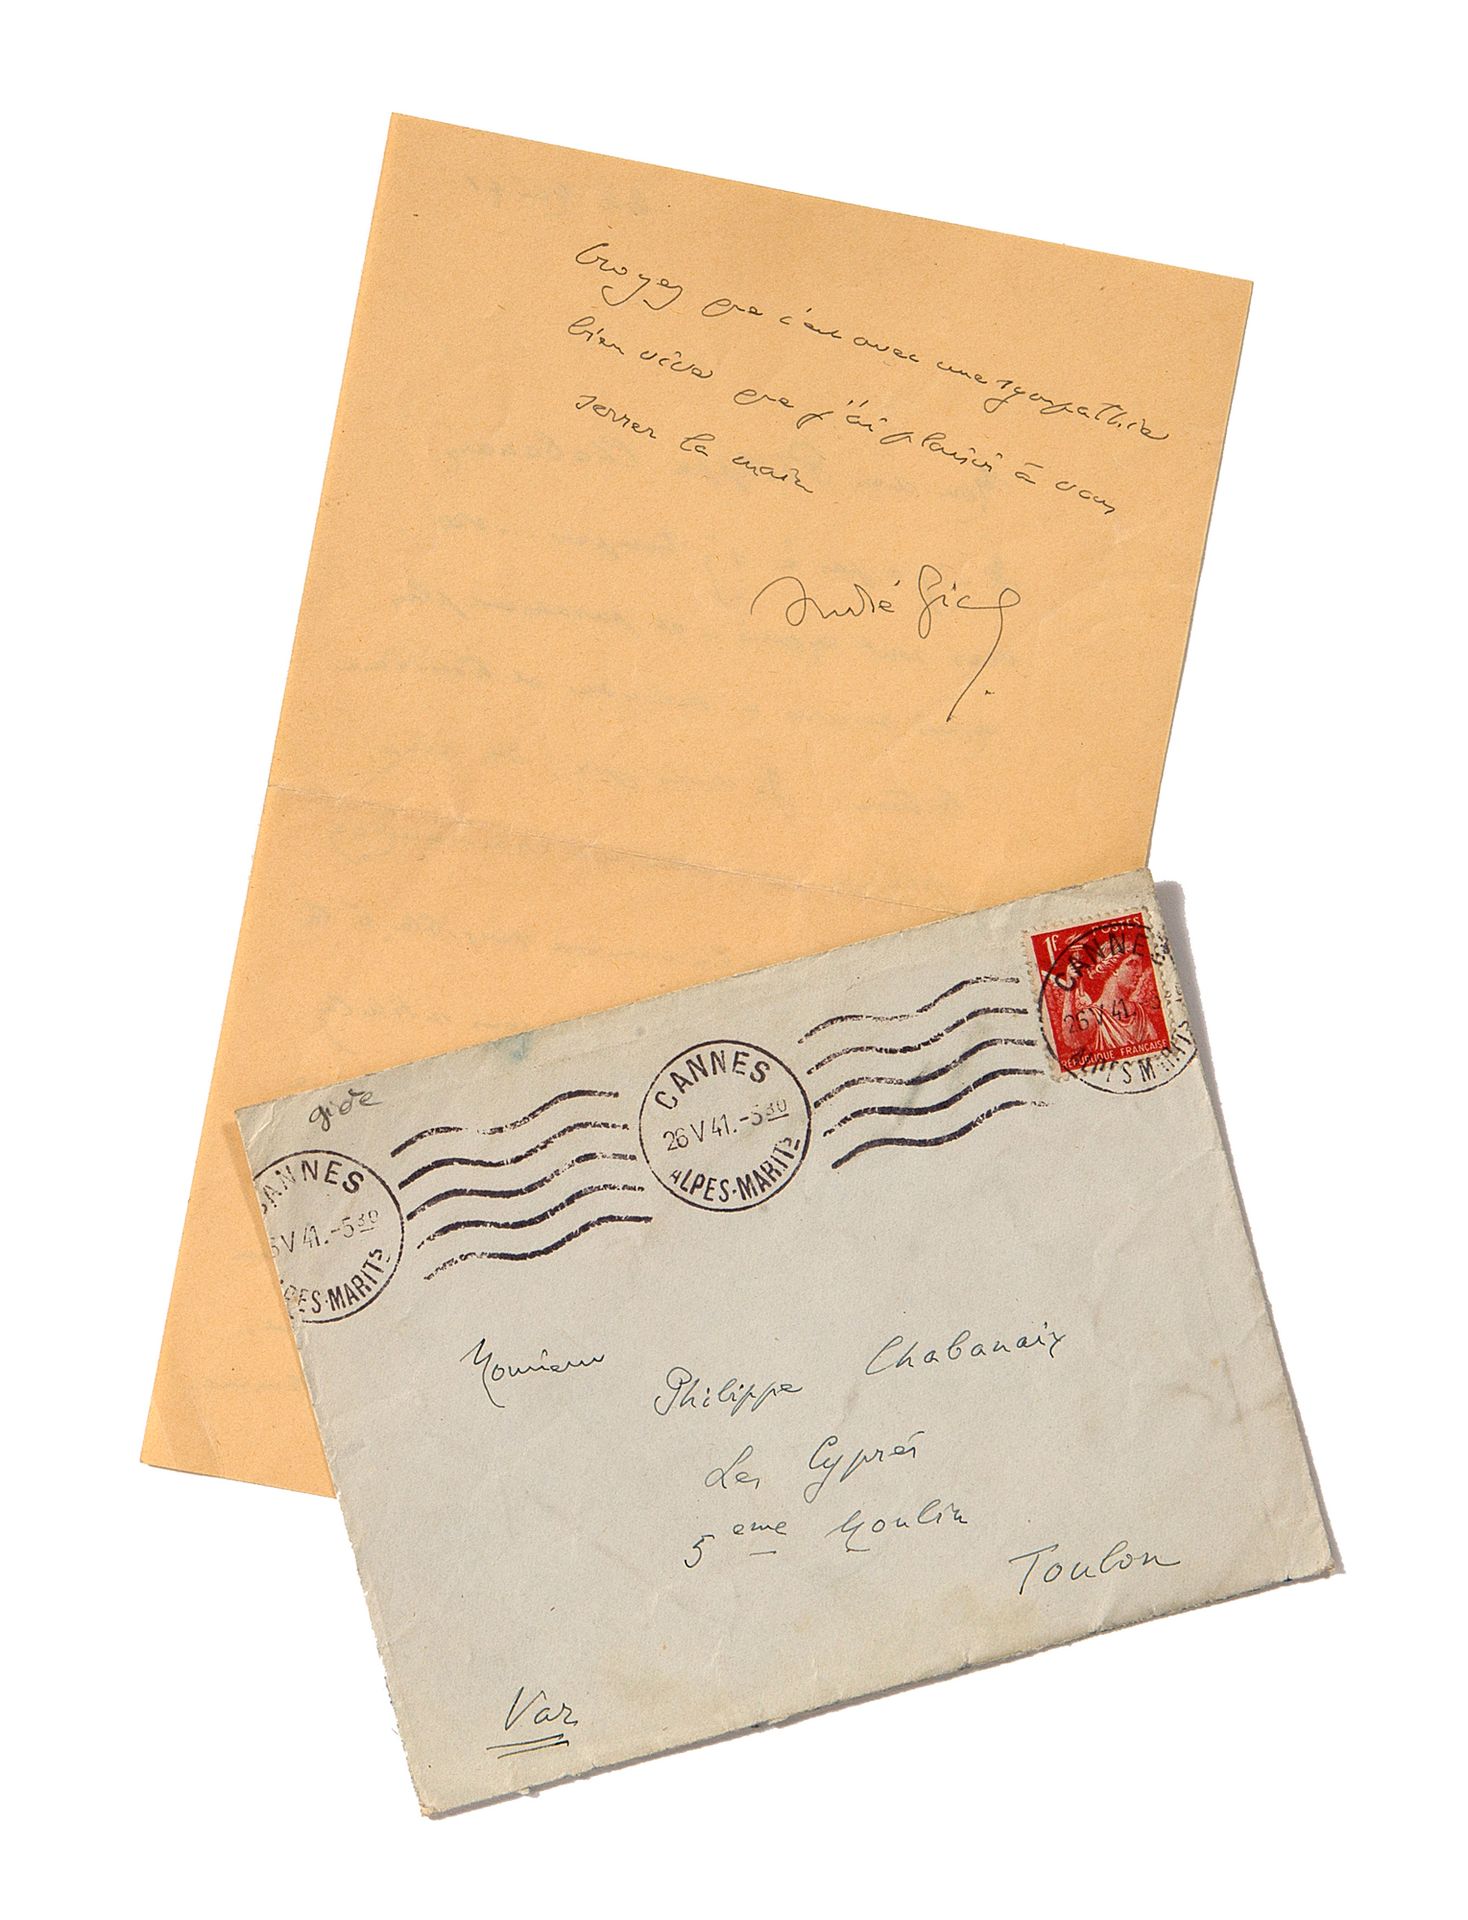 GIDE André (1869-1951) L.A.S. Addressed to the poet Philippe CHABANEIX. 22 May 1&hellip;